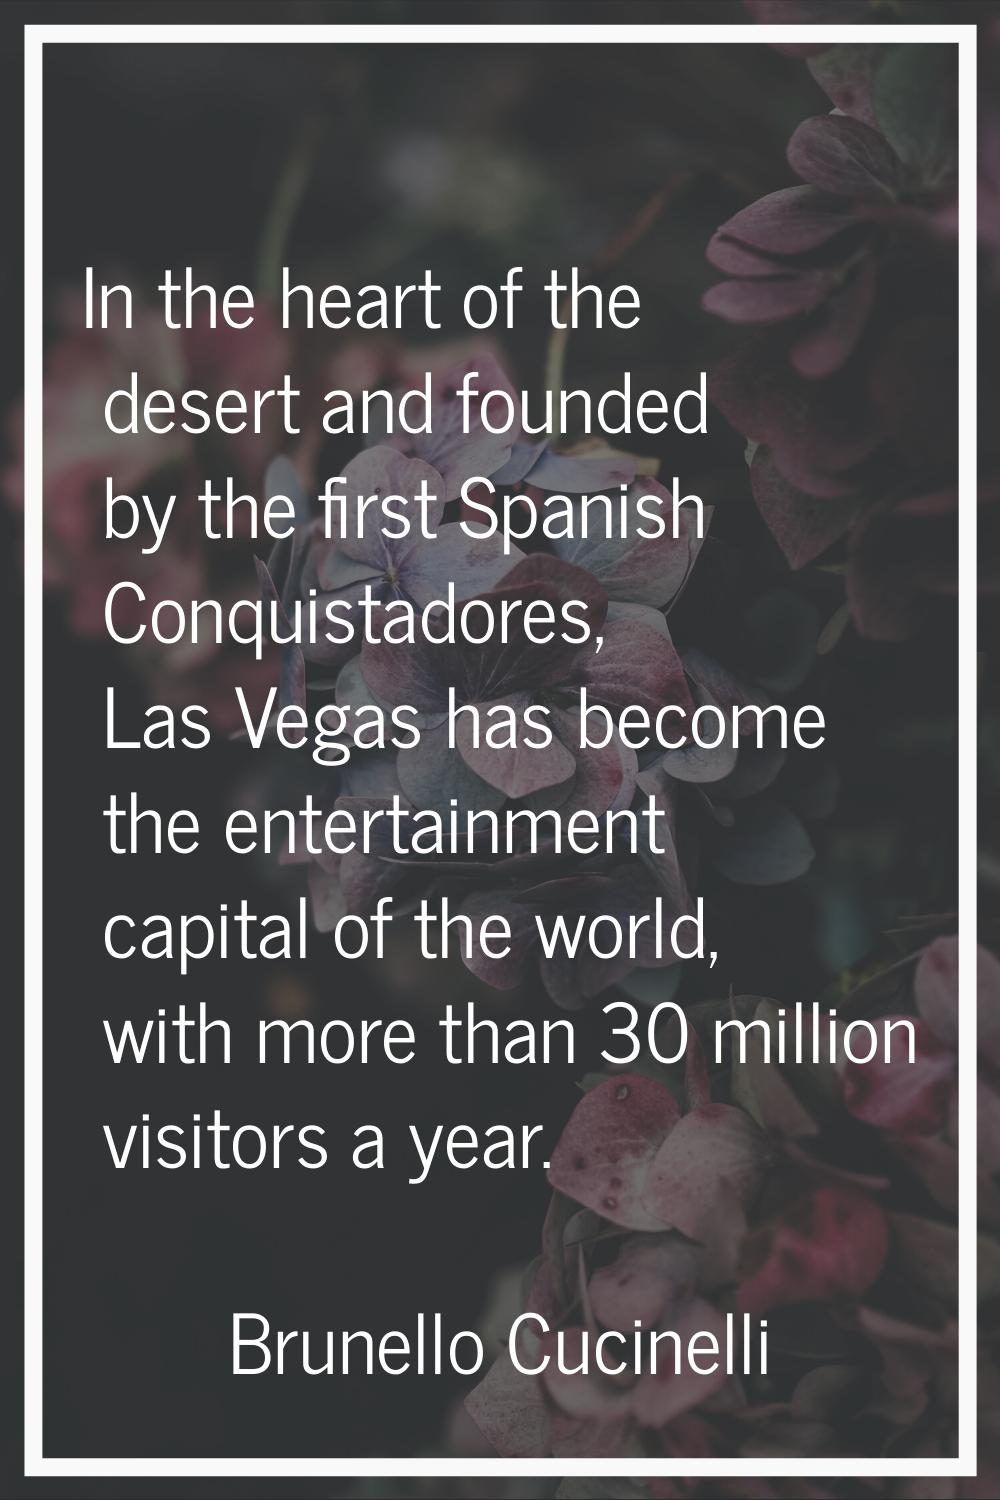 In the heart of the desert and founded by the first Spanish Conquistadores, Las Vegas has become th